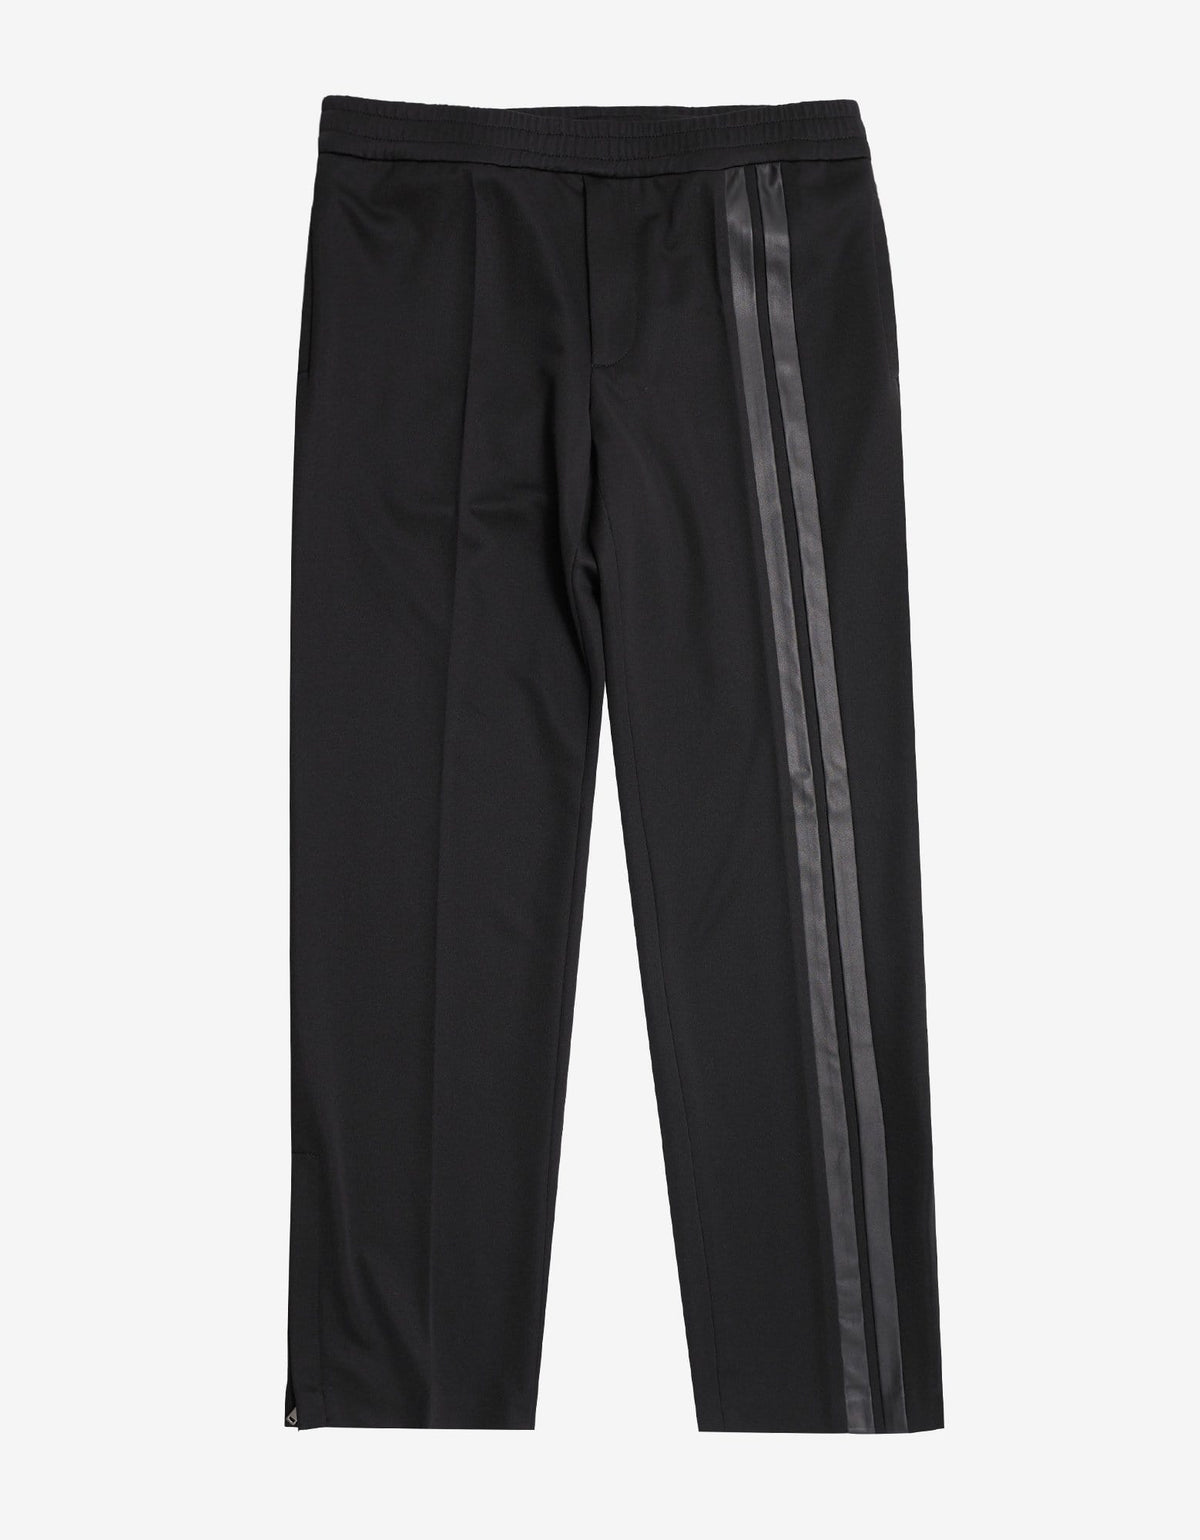 Valentino Black Trousers with Tonal Stripes